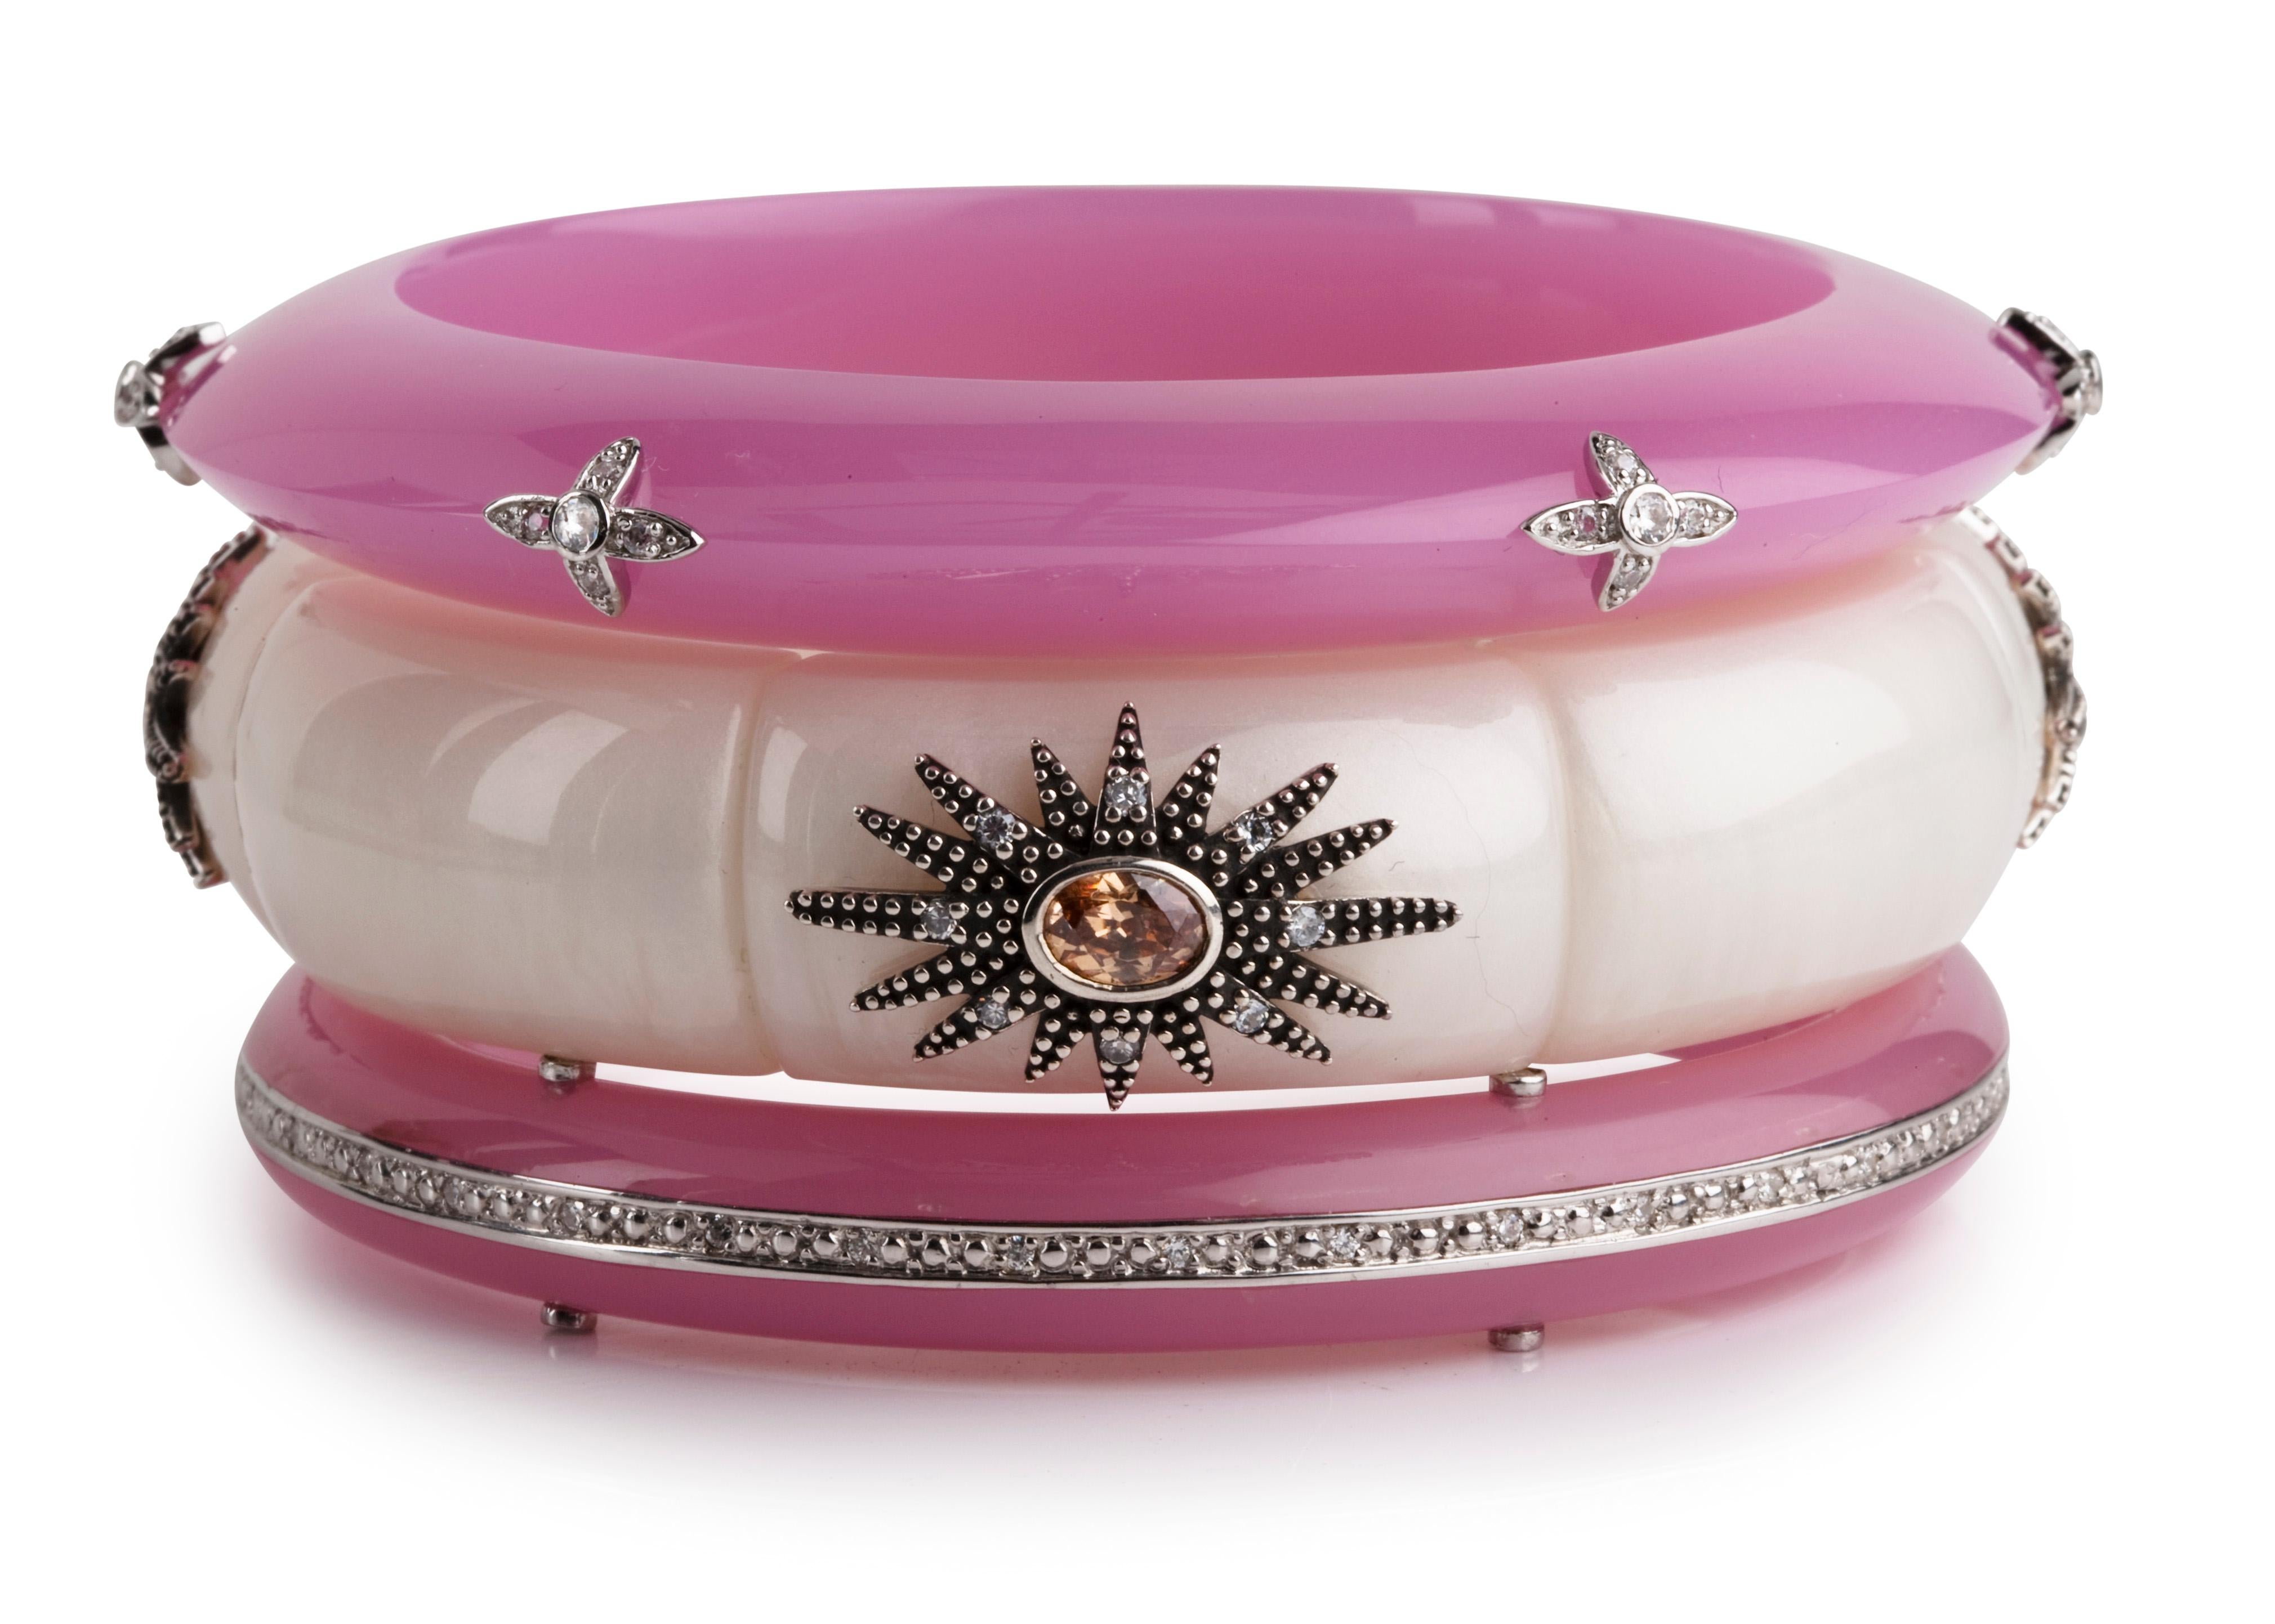 Miriam Salat star bangle 
This Miriam Salat bangle features resin with vintage sterling silver. 
Cubic zircon full diamond facet rounds, prong set.
Topaz oval shapes 
Bangle is a slip on to fit your hand.  
Measures apx. 6-1/2 inches
1 inches in